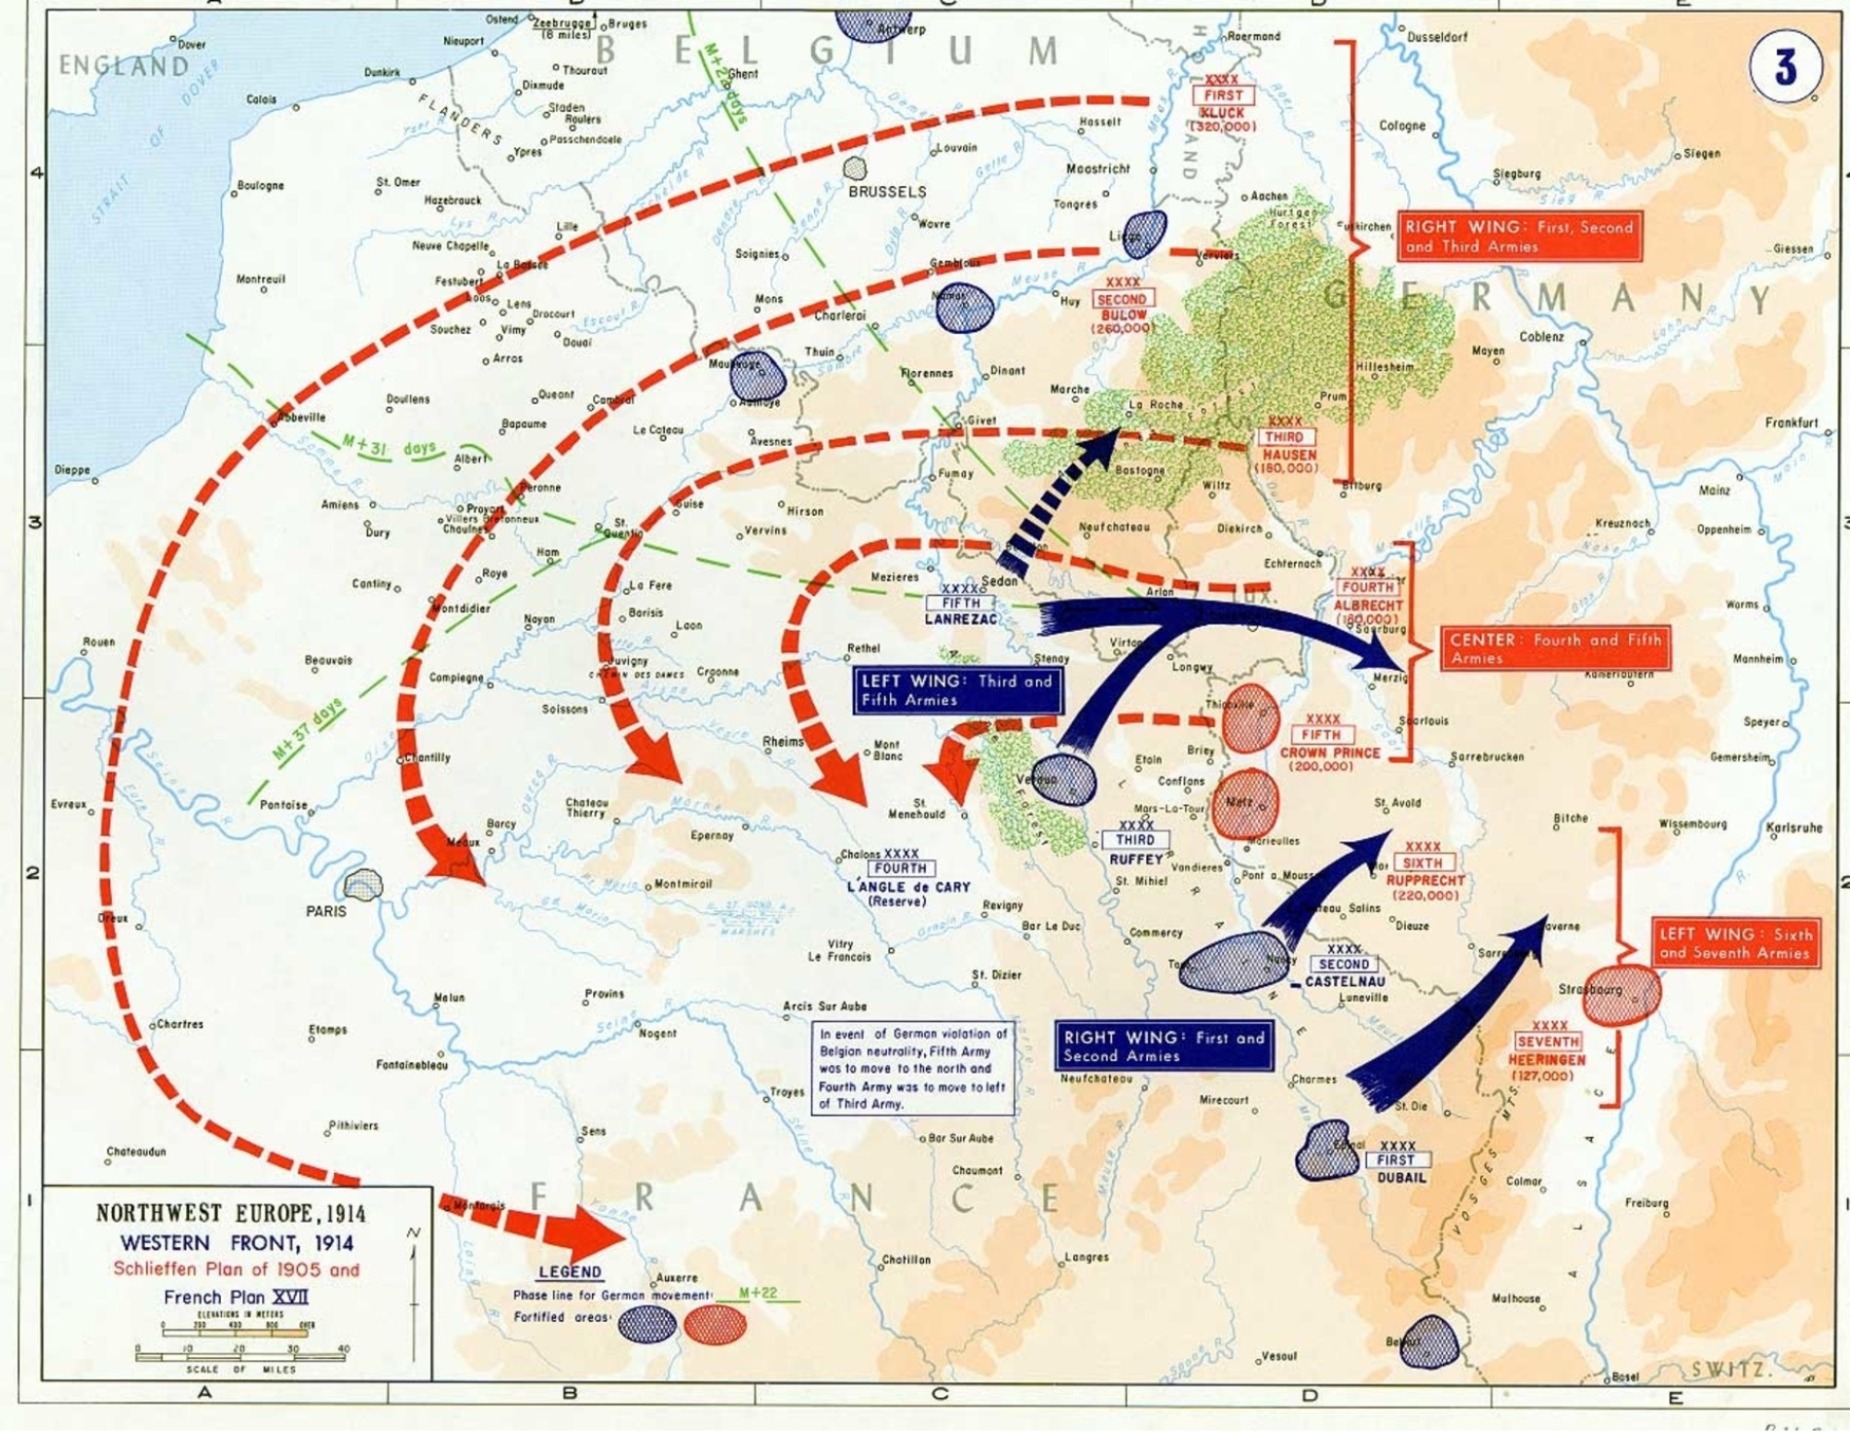 The Schlieffen Plan indicates movement of six armies split between a right wing, center, and left wing through Germany and France